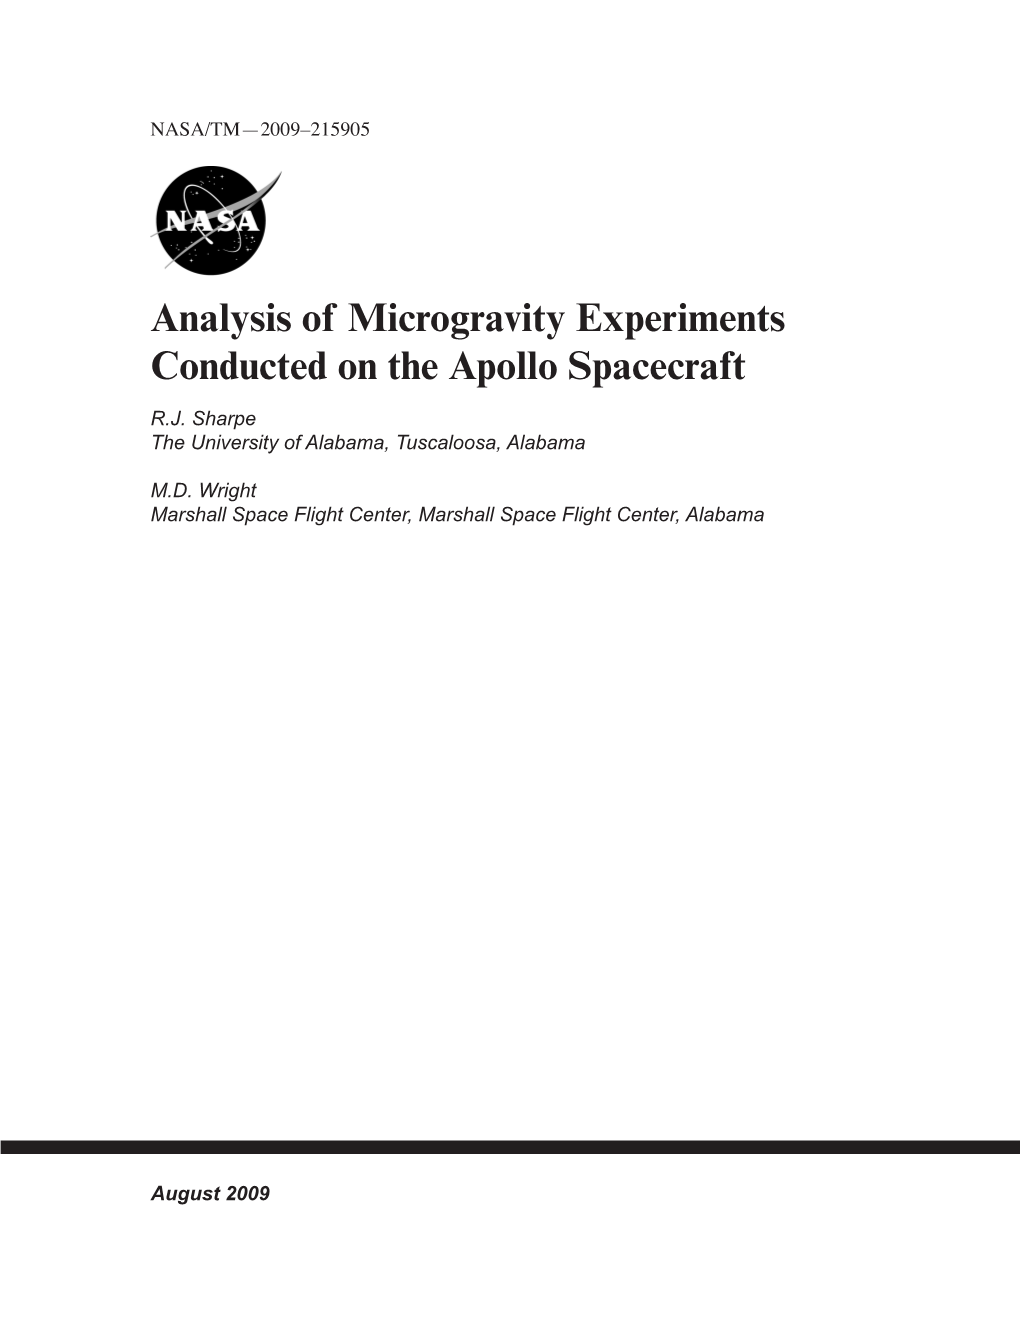 Analysis of Microgravity Experiments Conducted on the Apollo Spacecraft